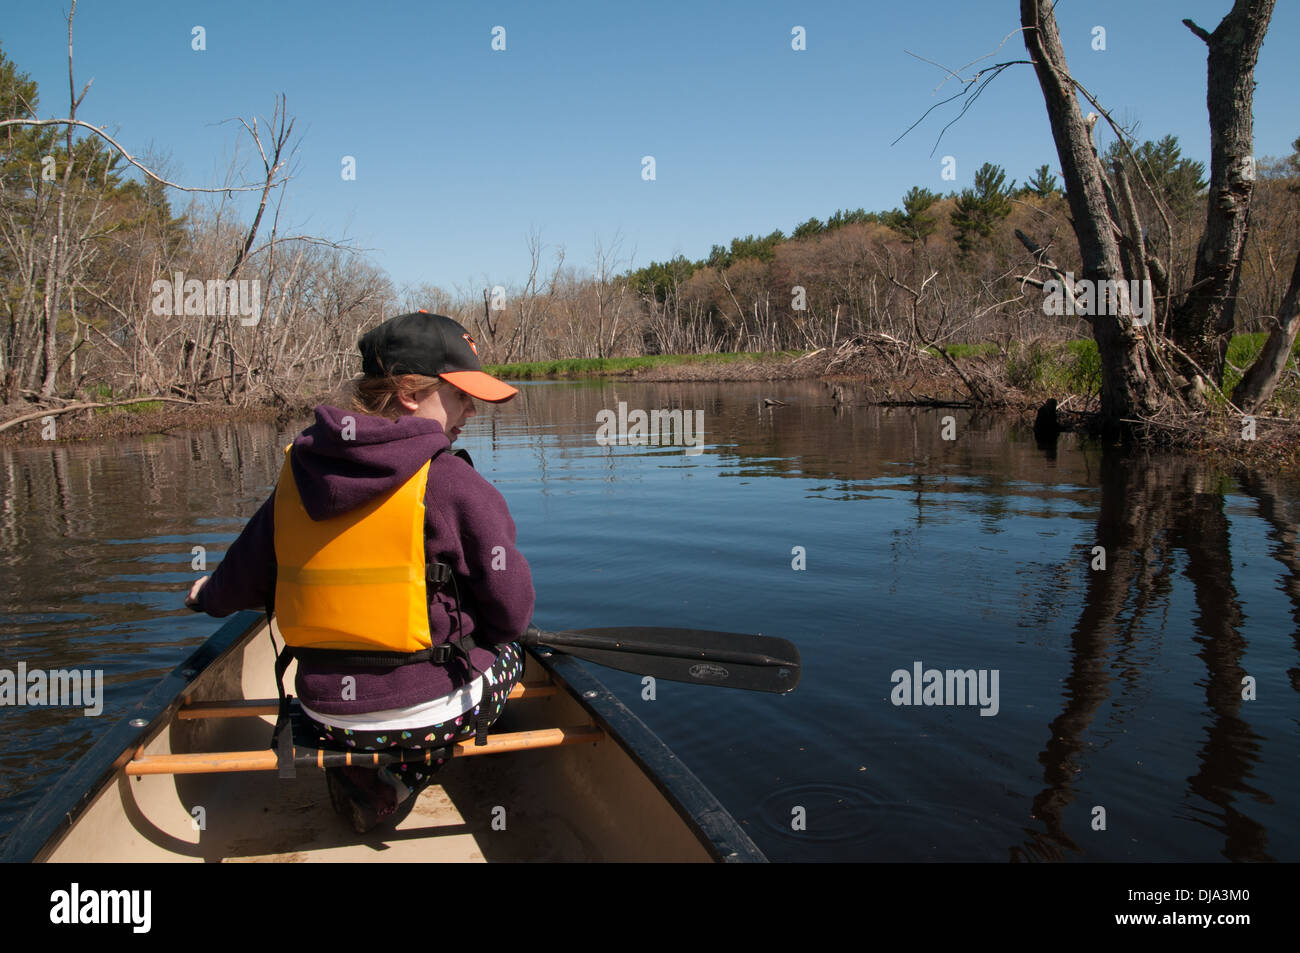 11 year old girl paddling on the Ipswich River, Topsfield, MA Stock Photo